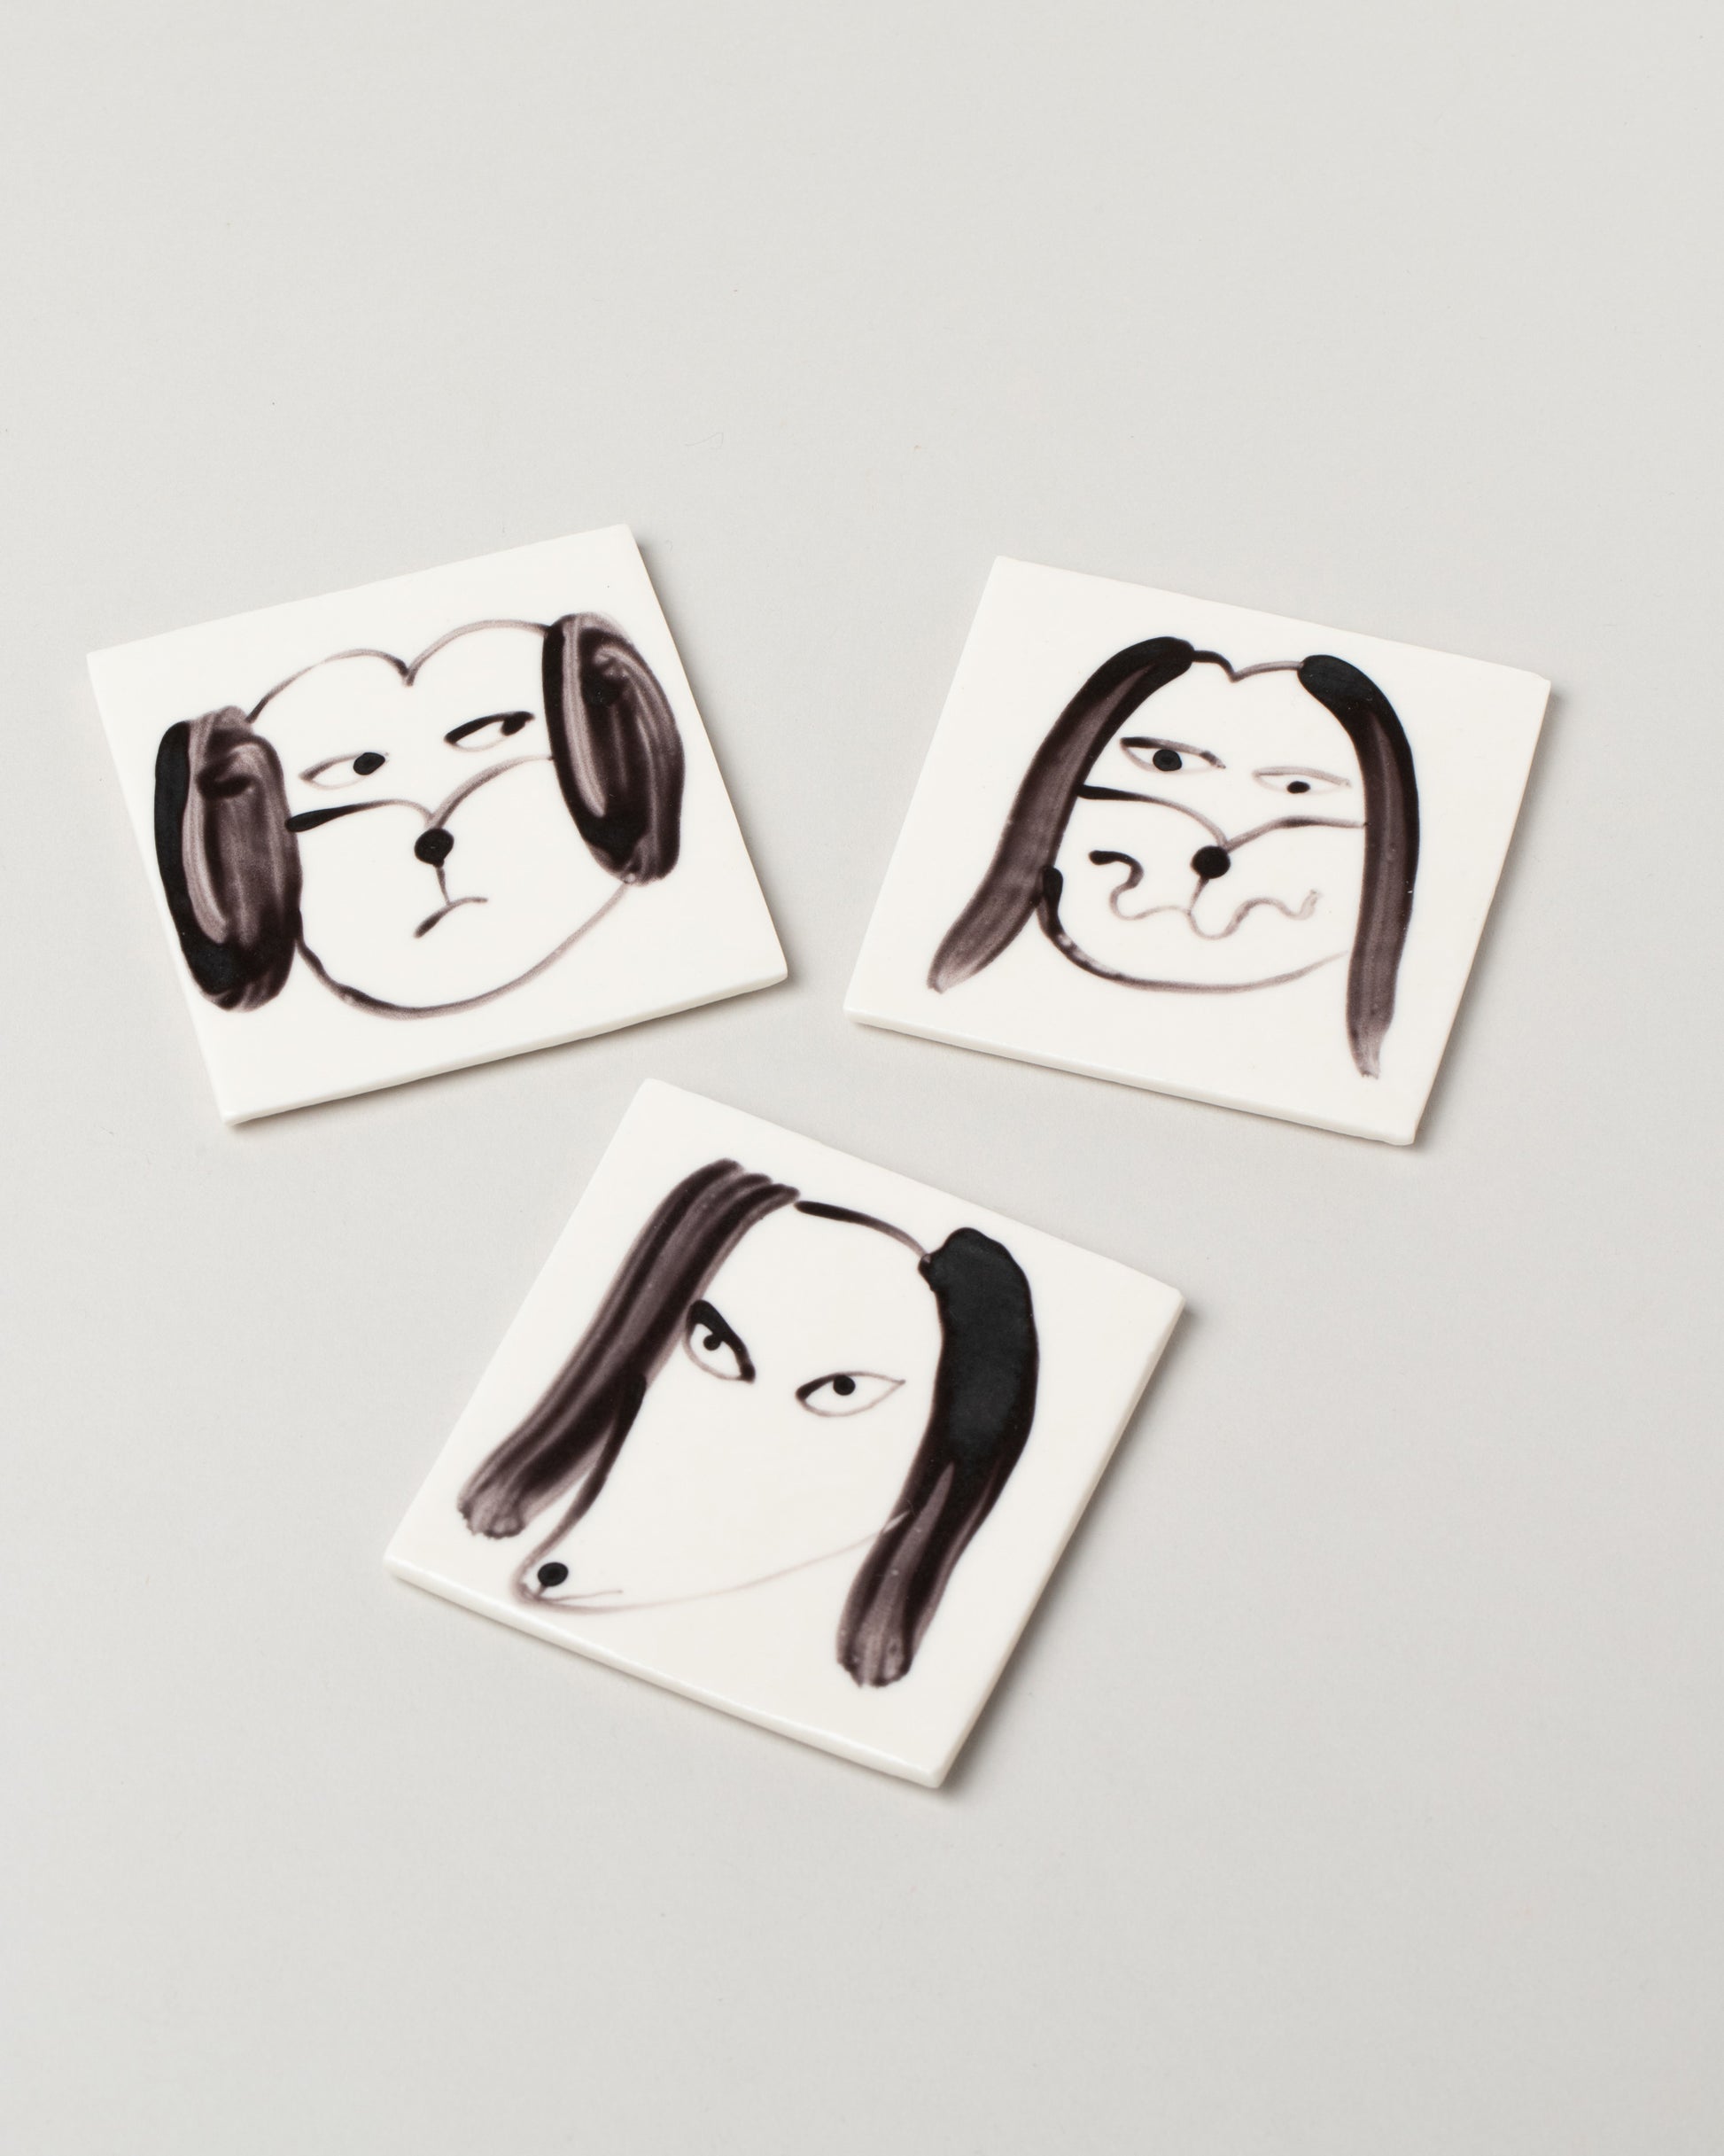 Closeup detail of the Eleonor Boström Dog Face Coasters on light color background.